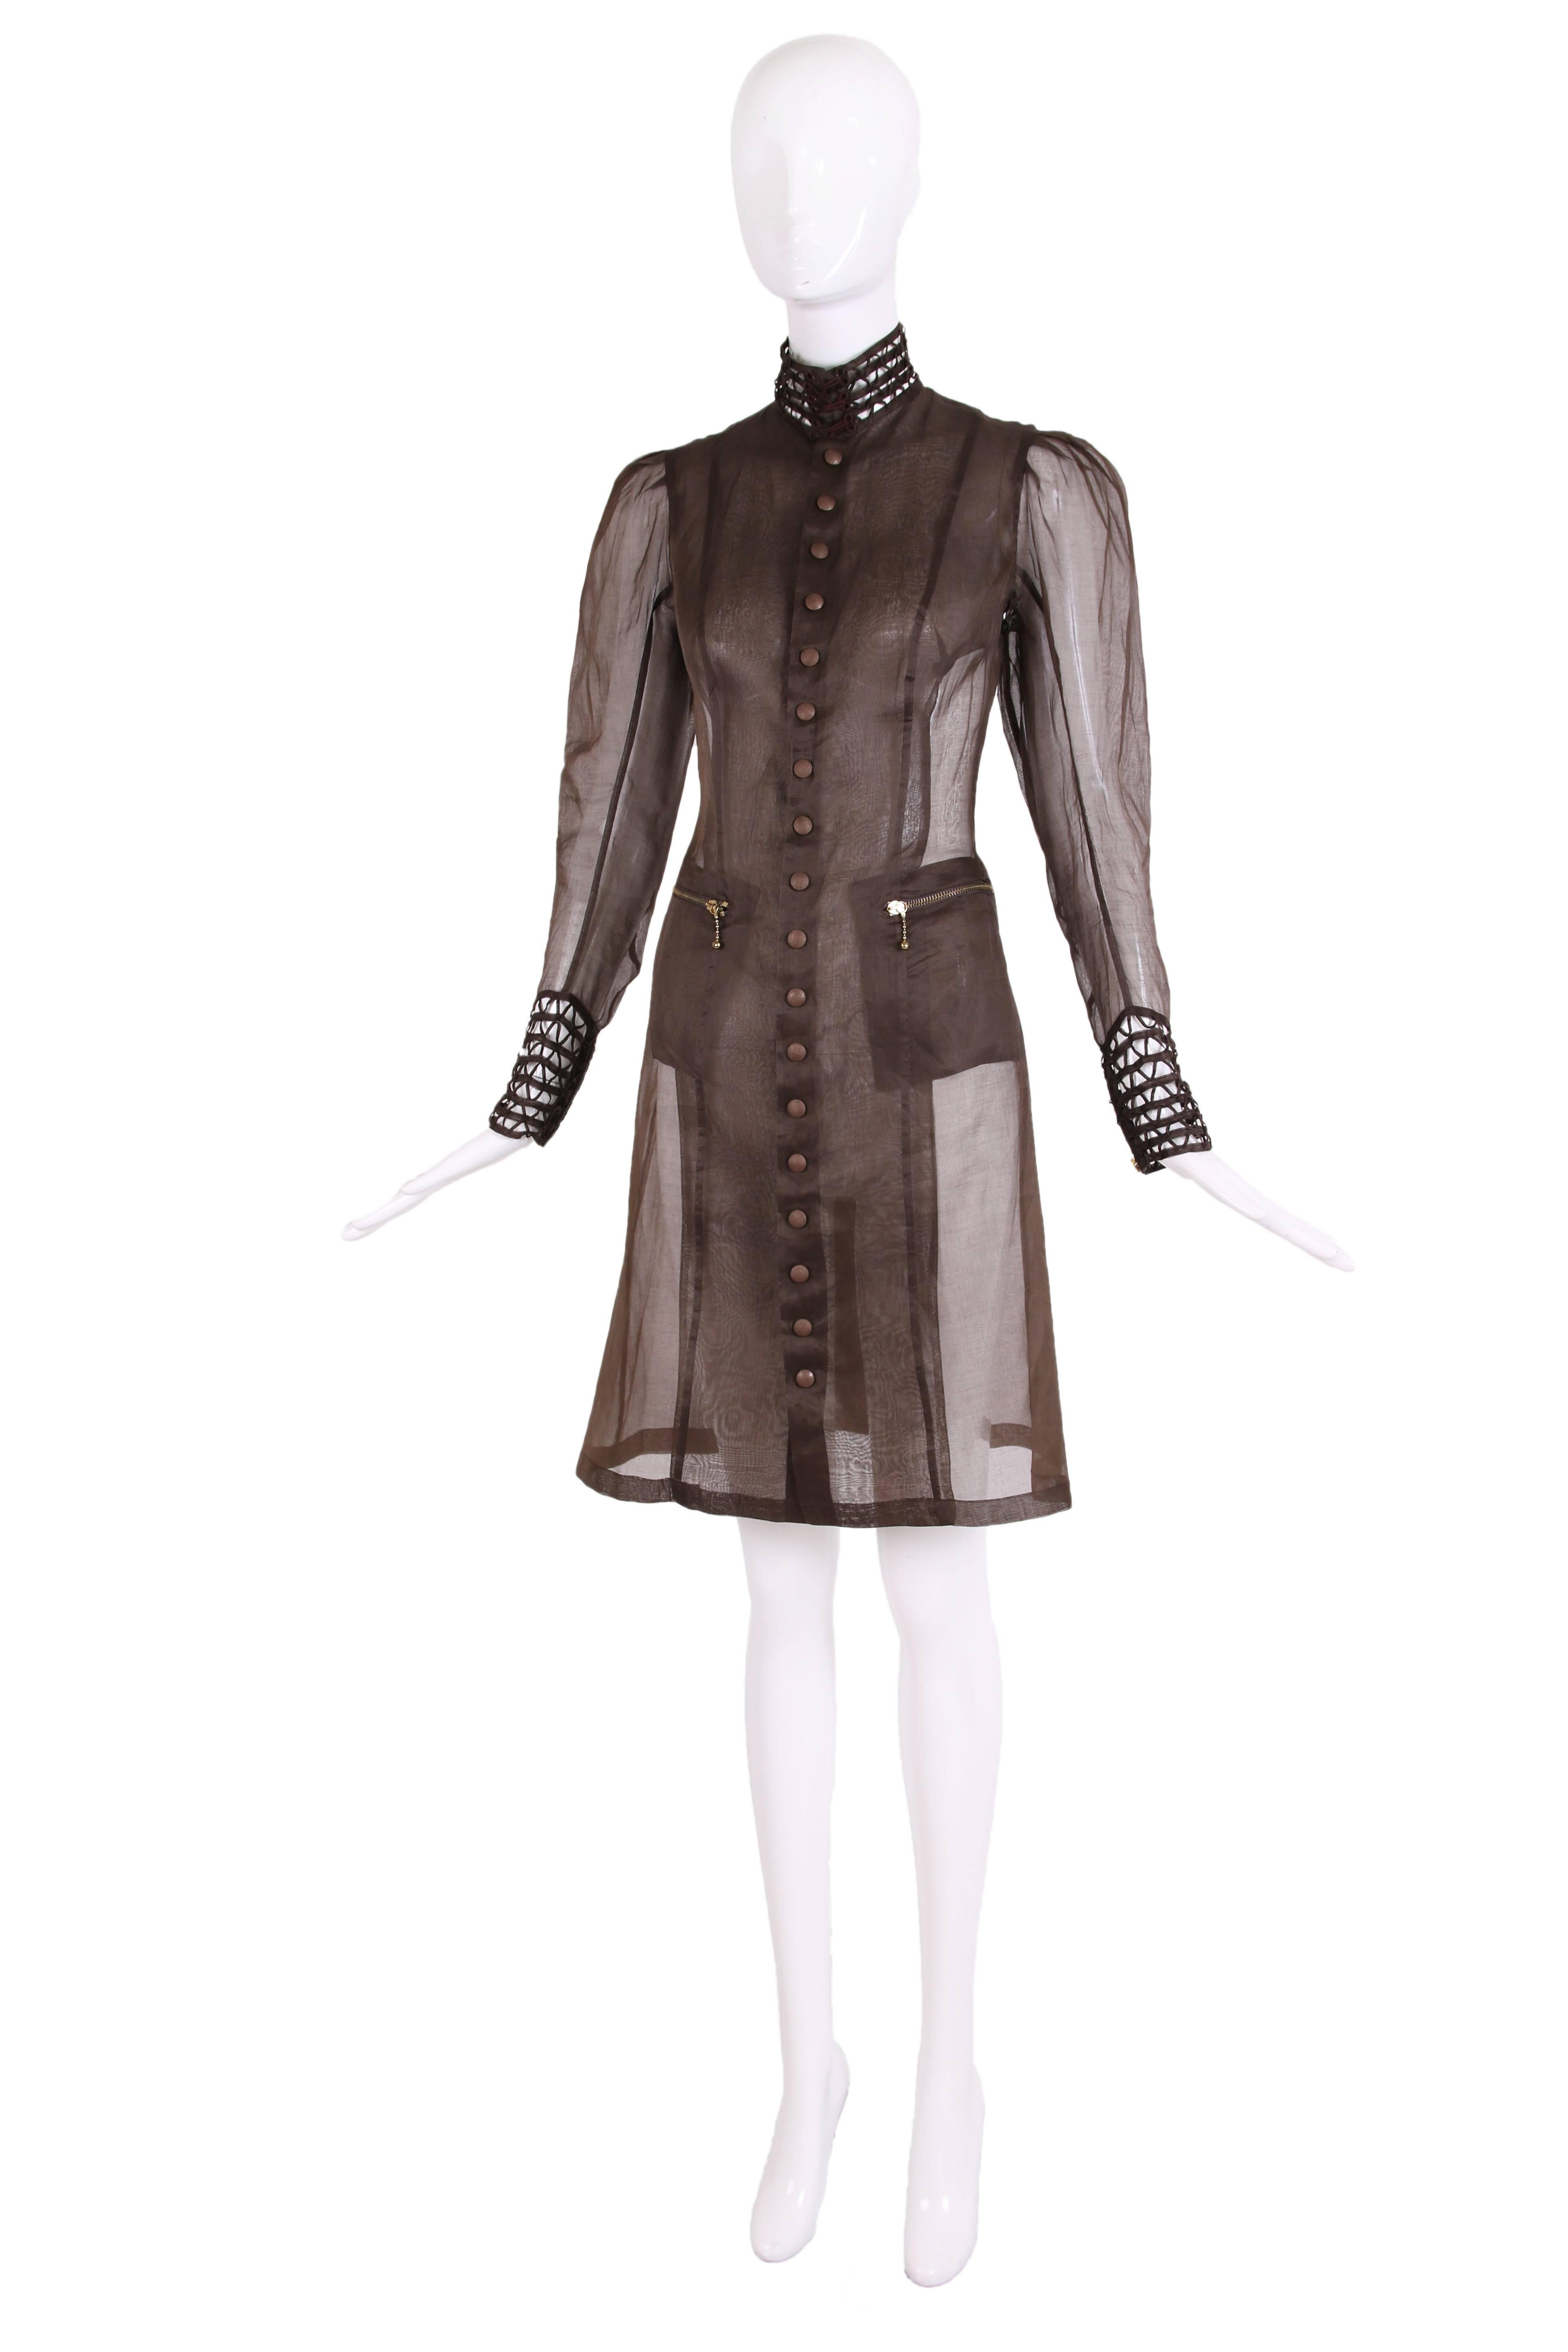 Jean Paul Gaultier sheer brown silk gazar Victorian-inspired  coat. This coat has a high lace collar with large hook and eye closures and matching lace 5.5" cuffs with zipper closures. There are 18 covered snaps at center front and small